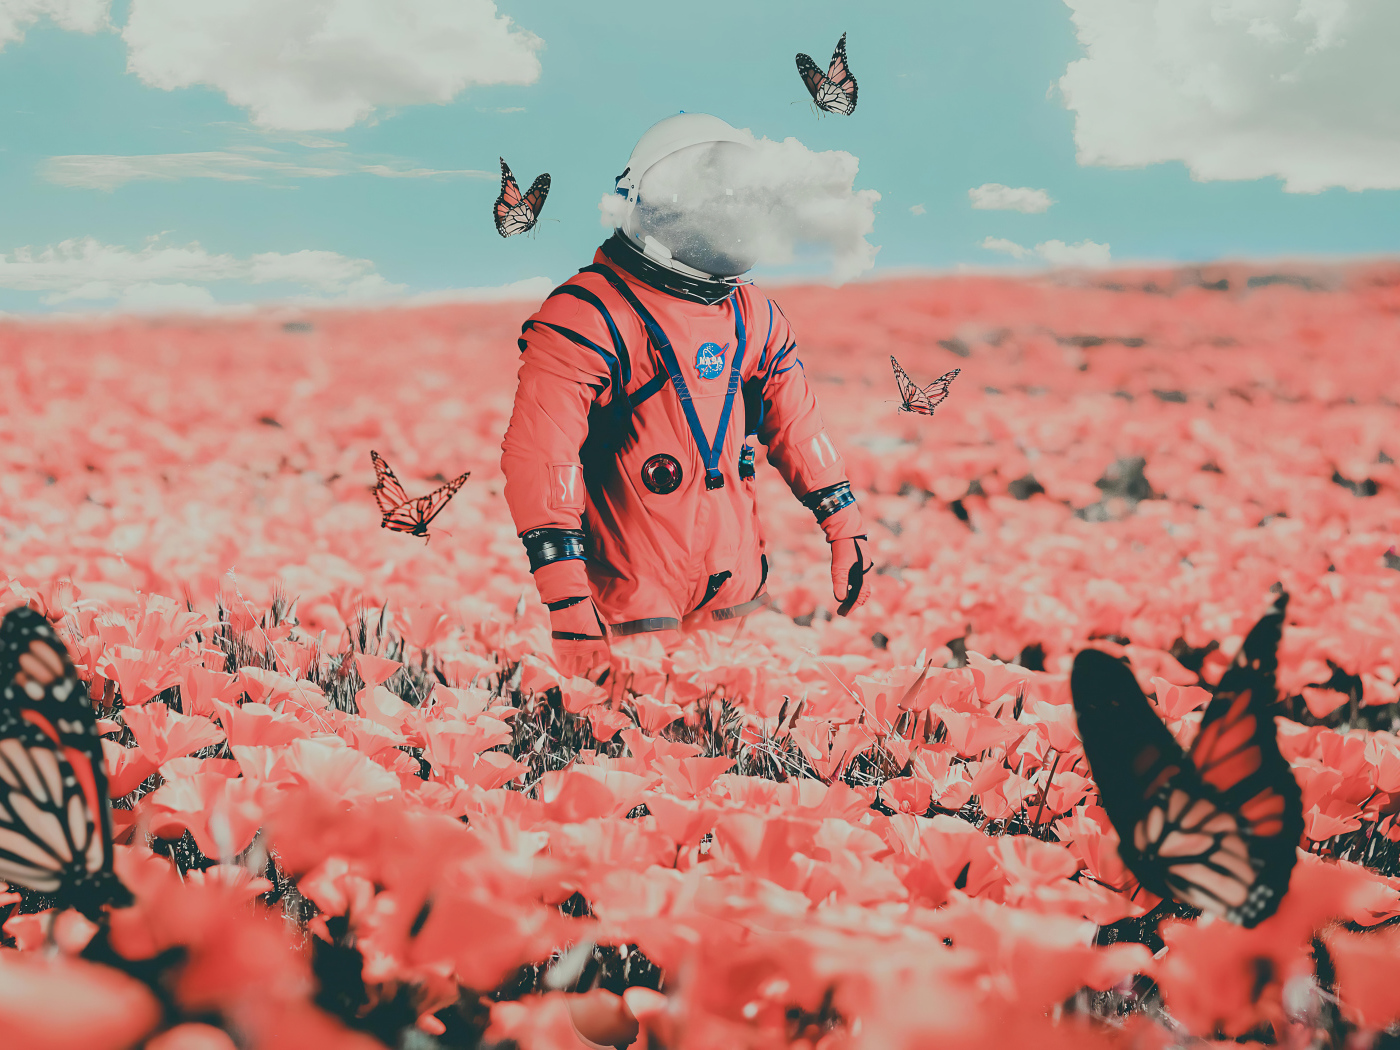 An astronaut walks across a field with butterflies and red poppies